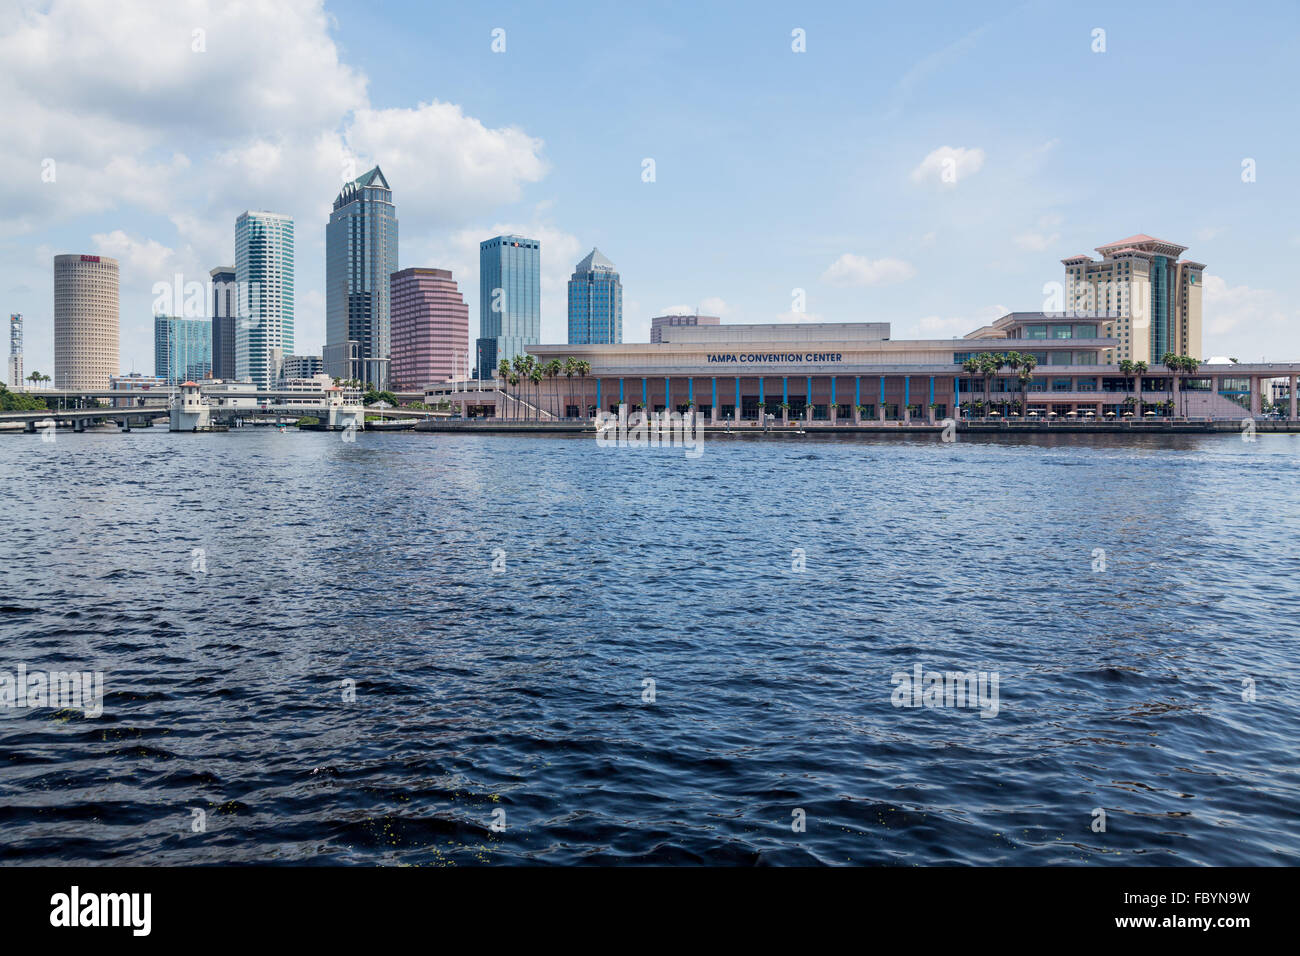 City skyline of Tampa Florida during the day Stock Photo